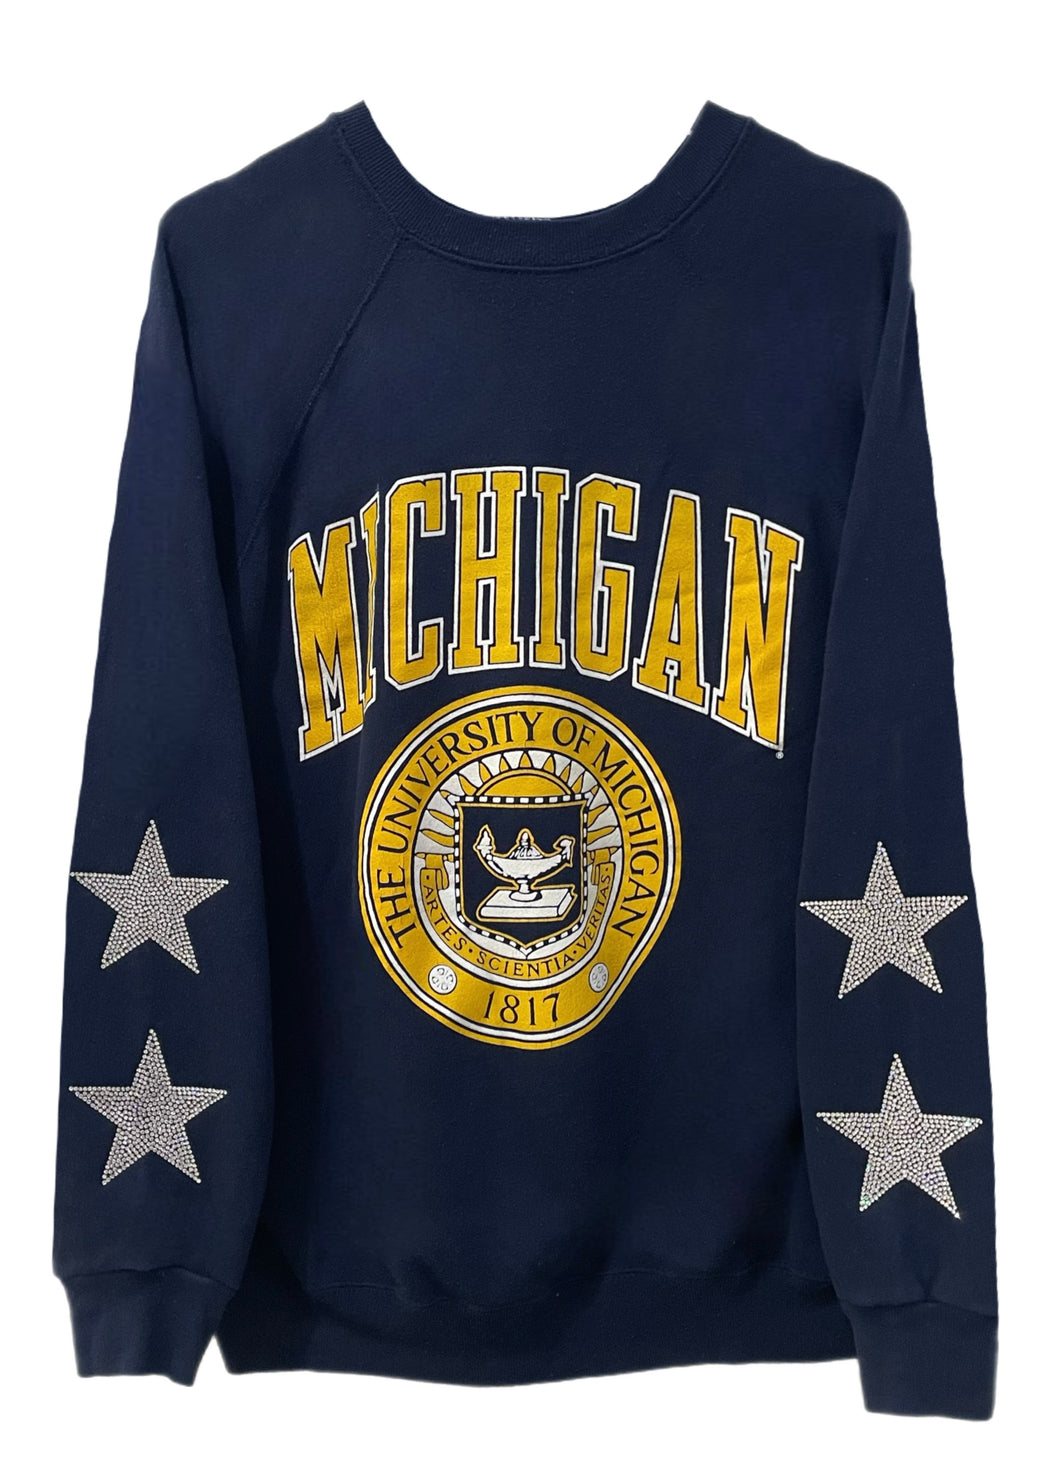 Michigan University, One of a KIND Vintage Sweatshirt with Crystal Star Design